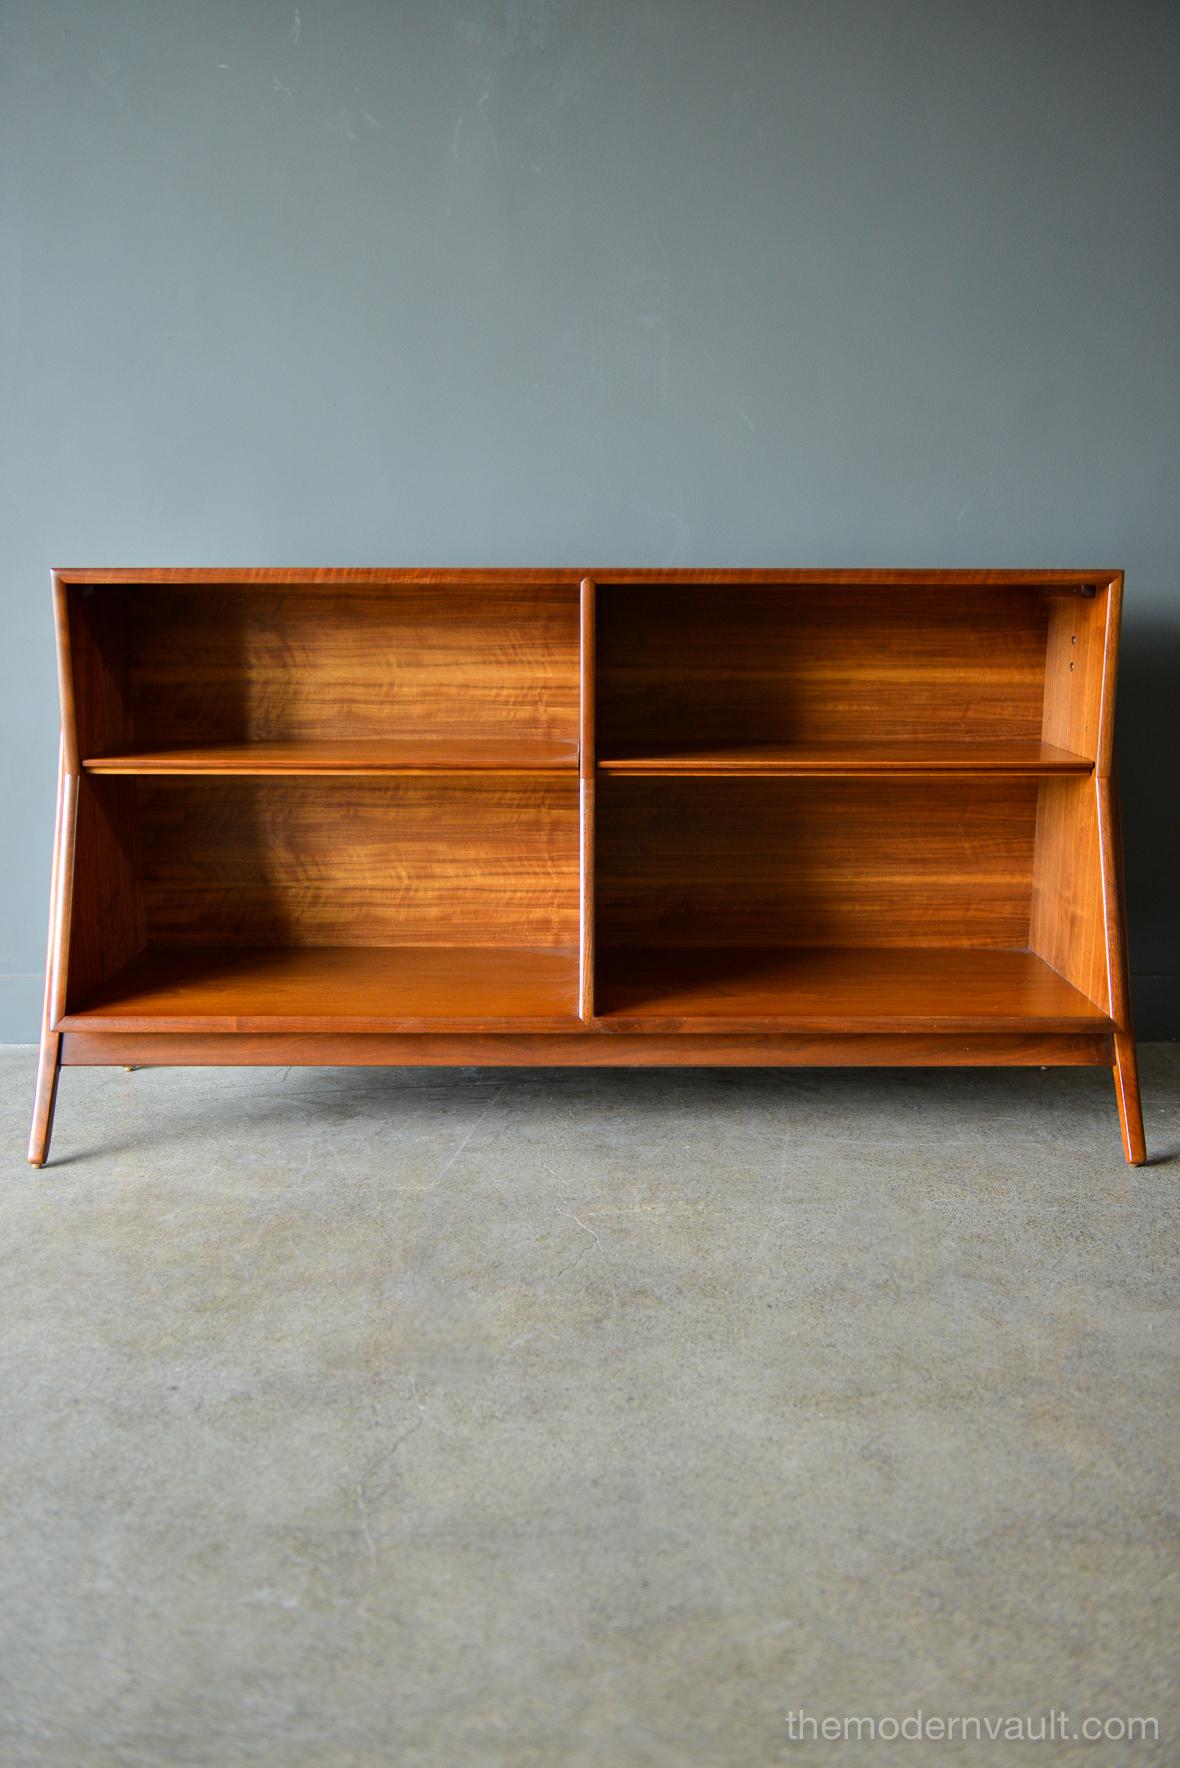 Sculpted walnut bookcase by Kipp Stewart for Drexel, circa 1965. Professionally restored in showroom condition, this beautiful piece is a classic and a great addition to any home. Adjustable inner shelving and finished on the reverse so you can